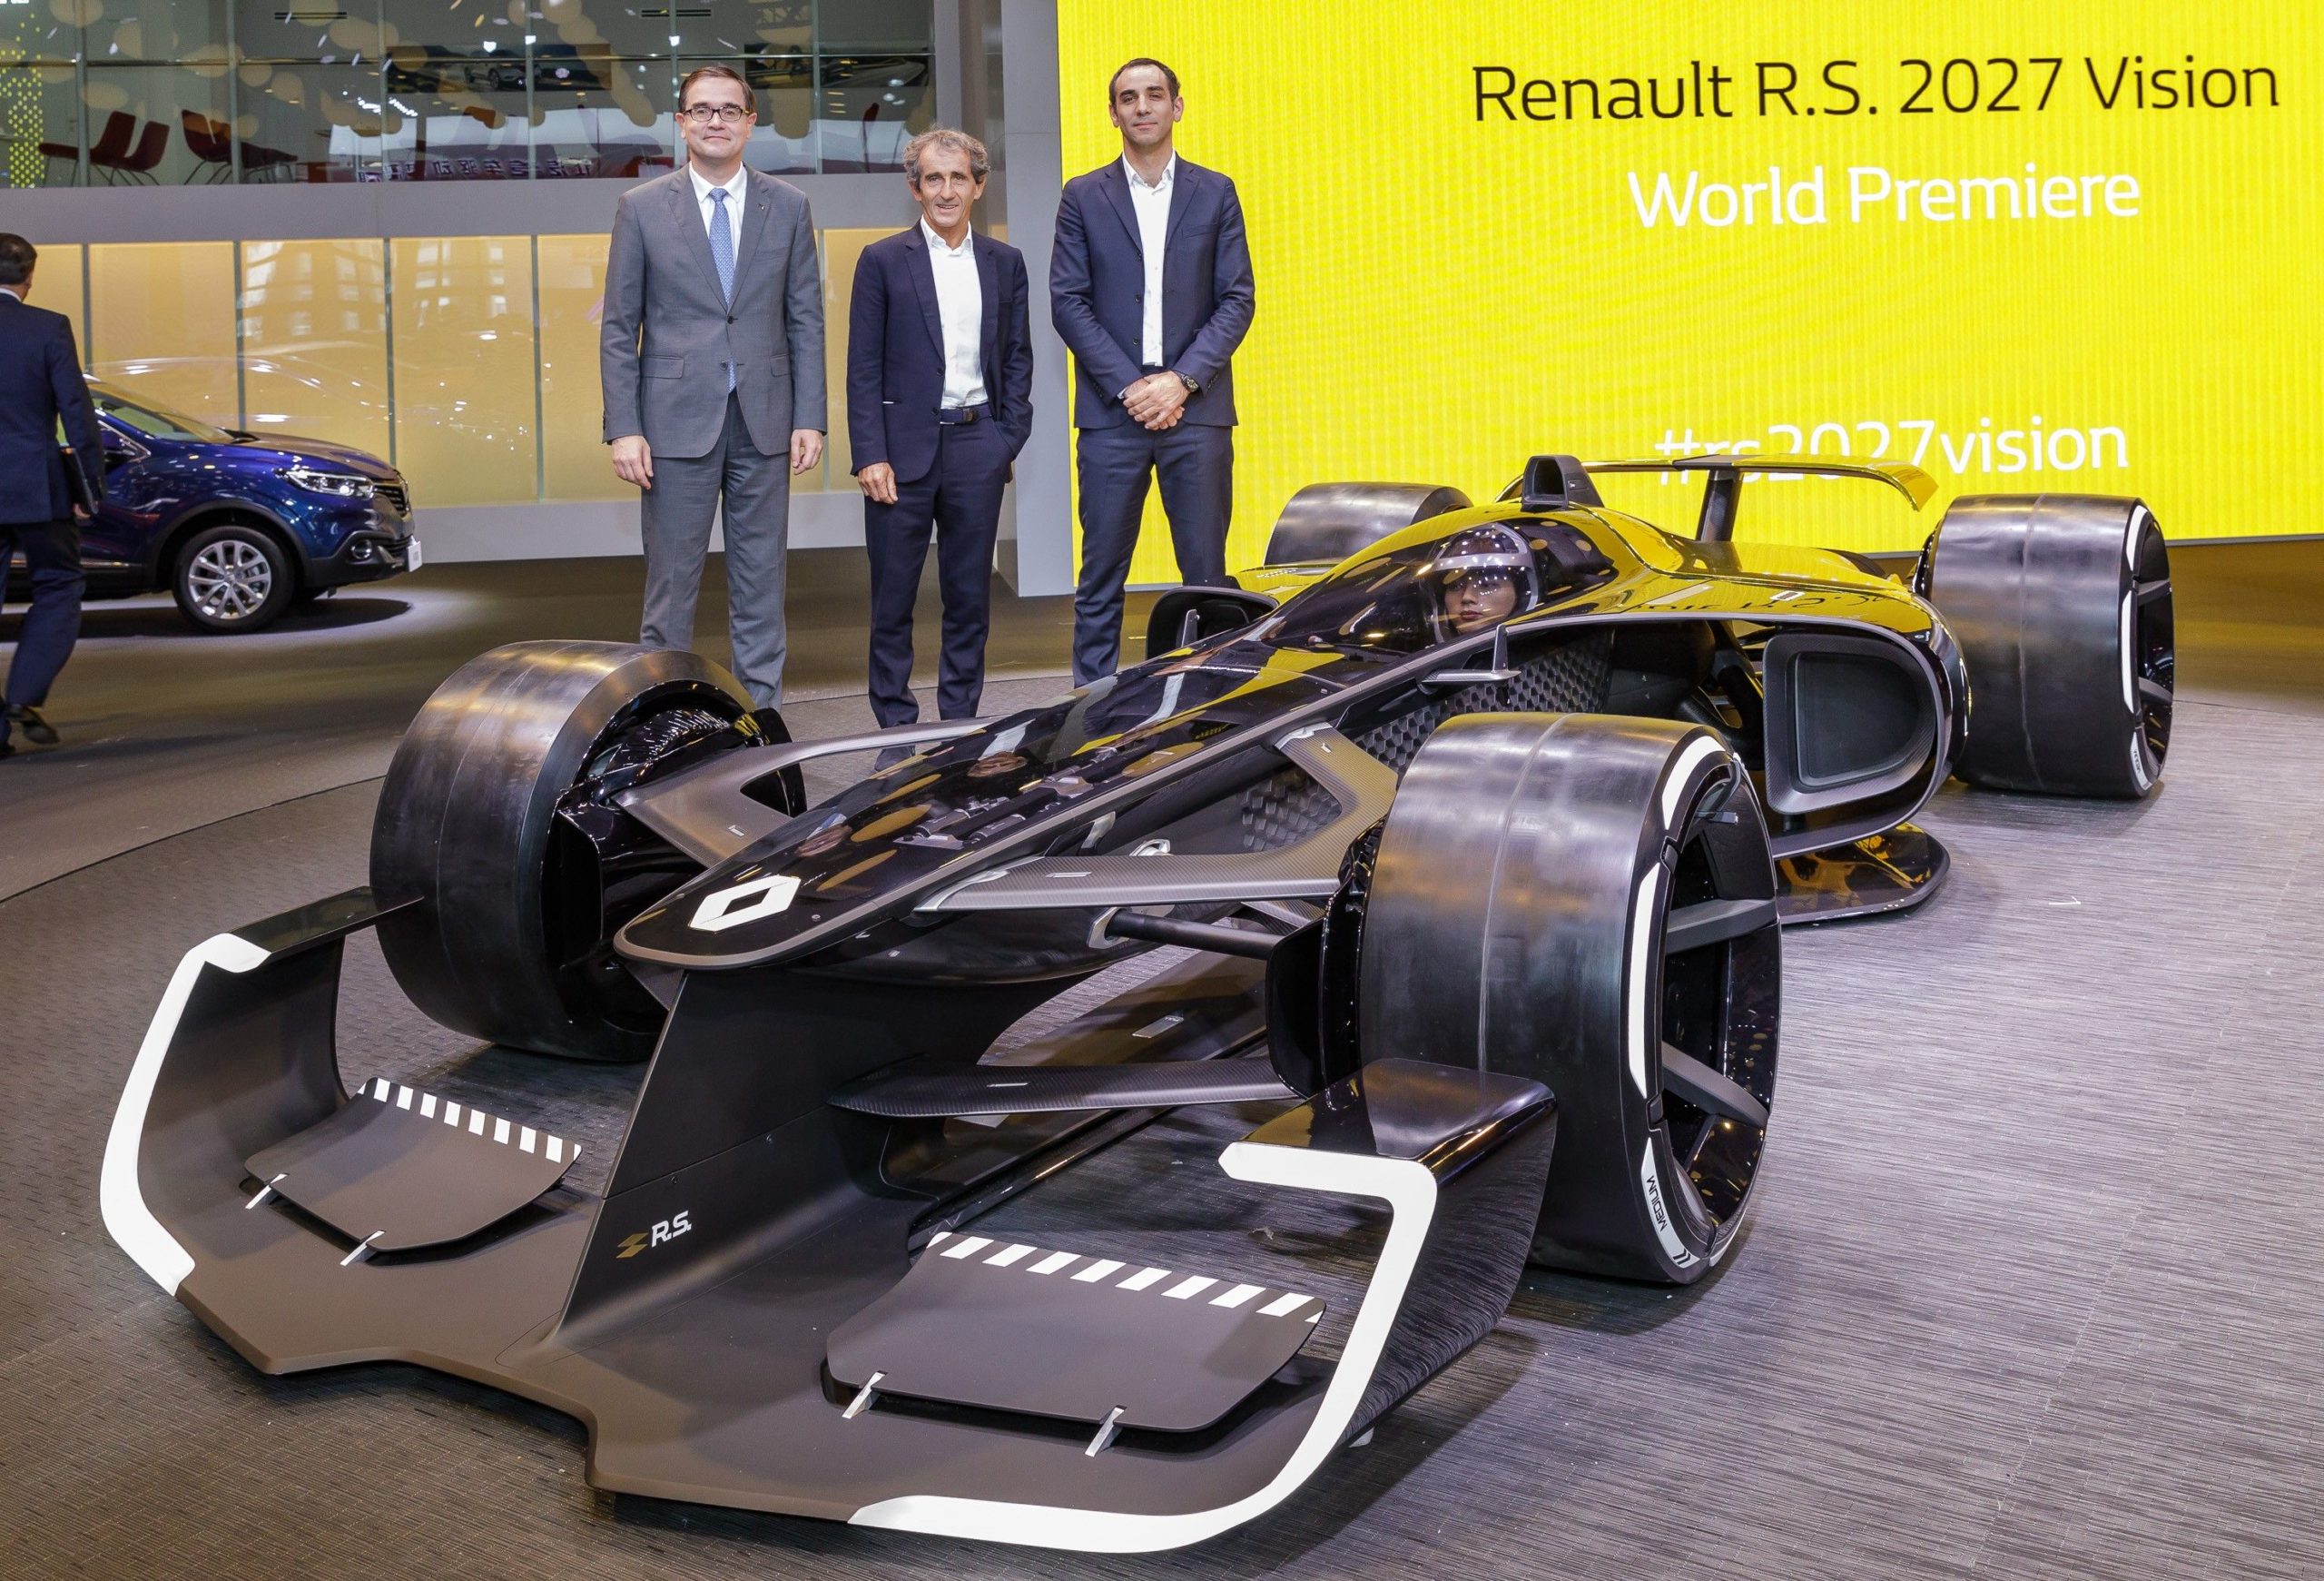 Renault’s RS 2027 Vision F1 Concept Is The Wacky Light-Up Fan-Centric Future We Need